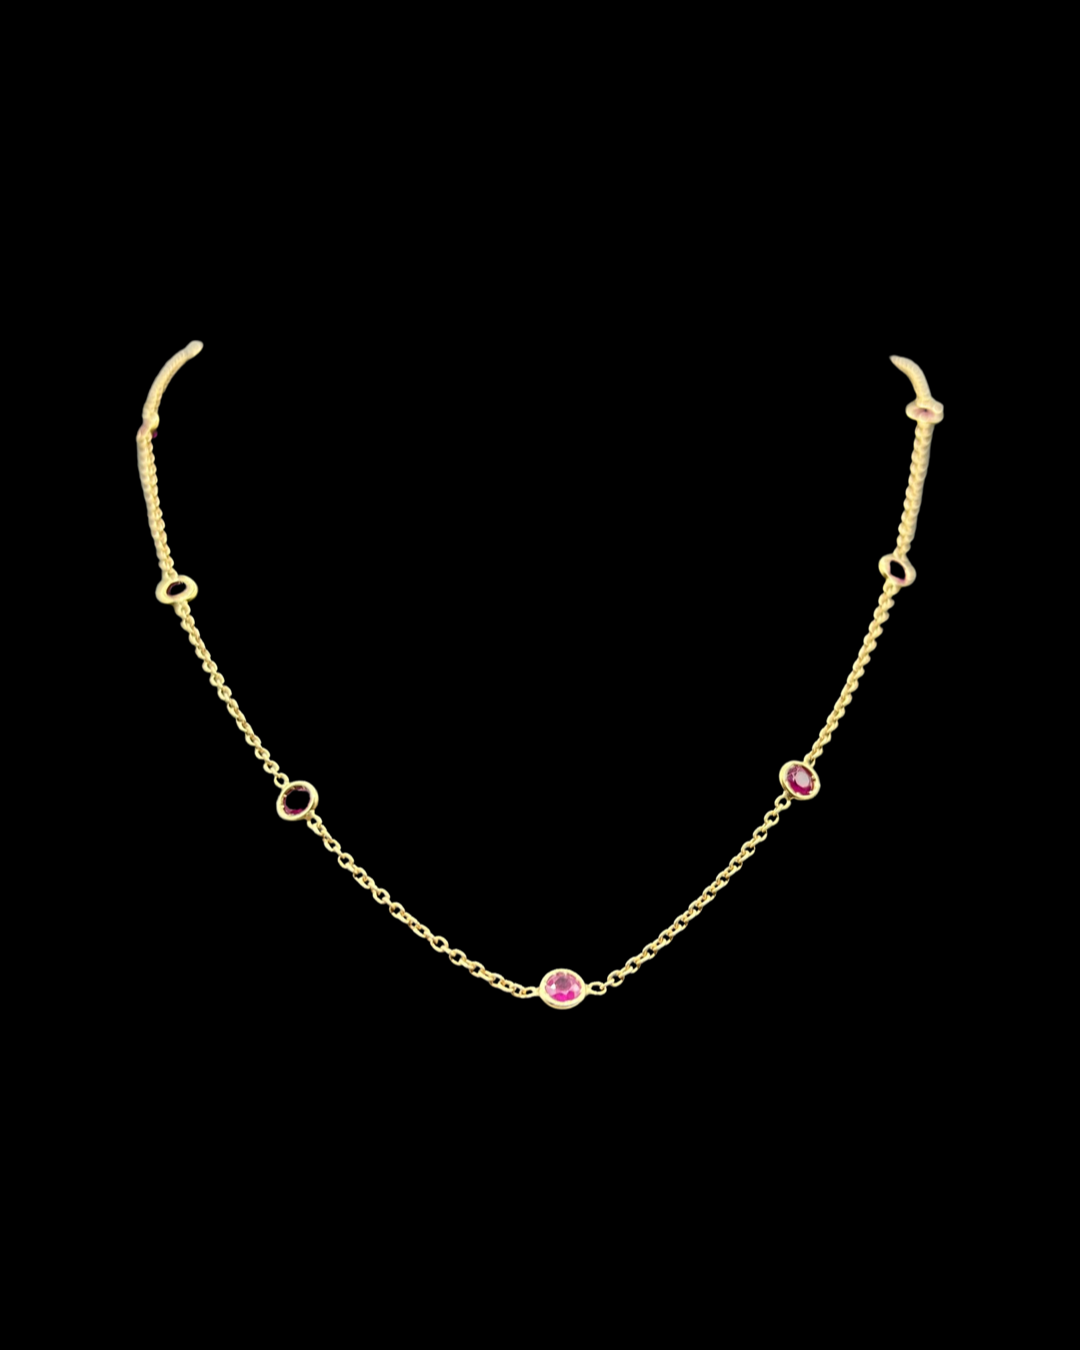 18ct Gold Rubies by The Yard Designer Style Necklace 46cm in length - Very Good Condition 4.7grams